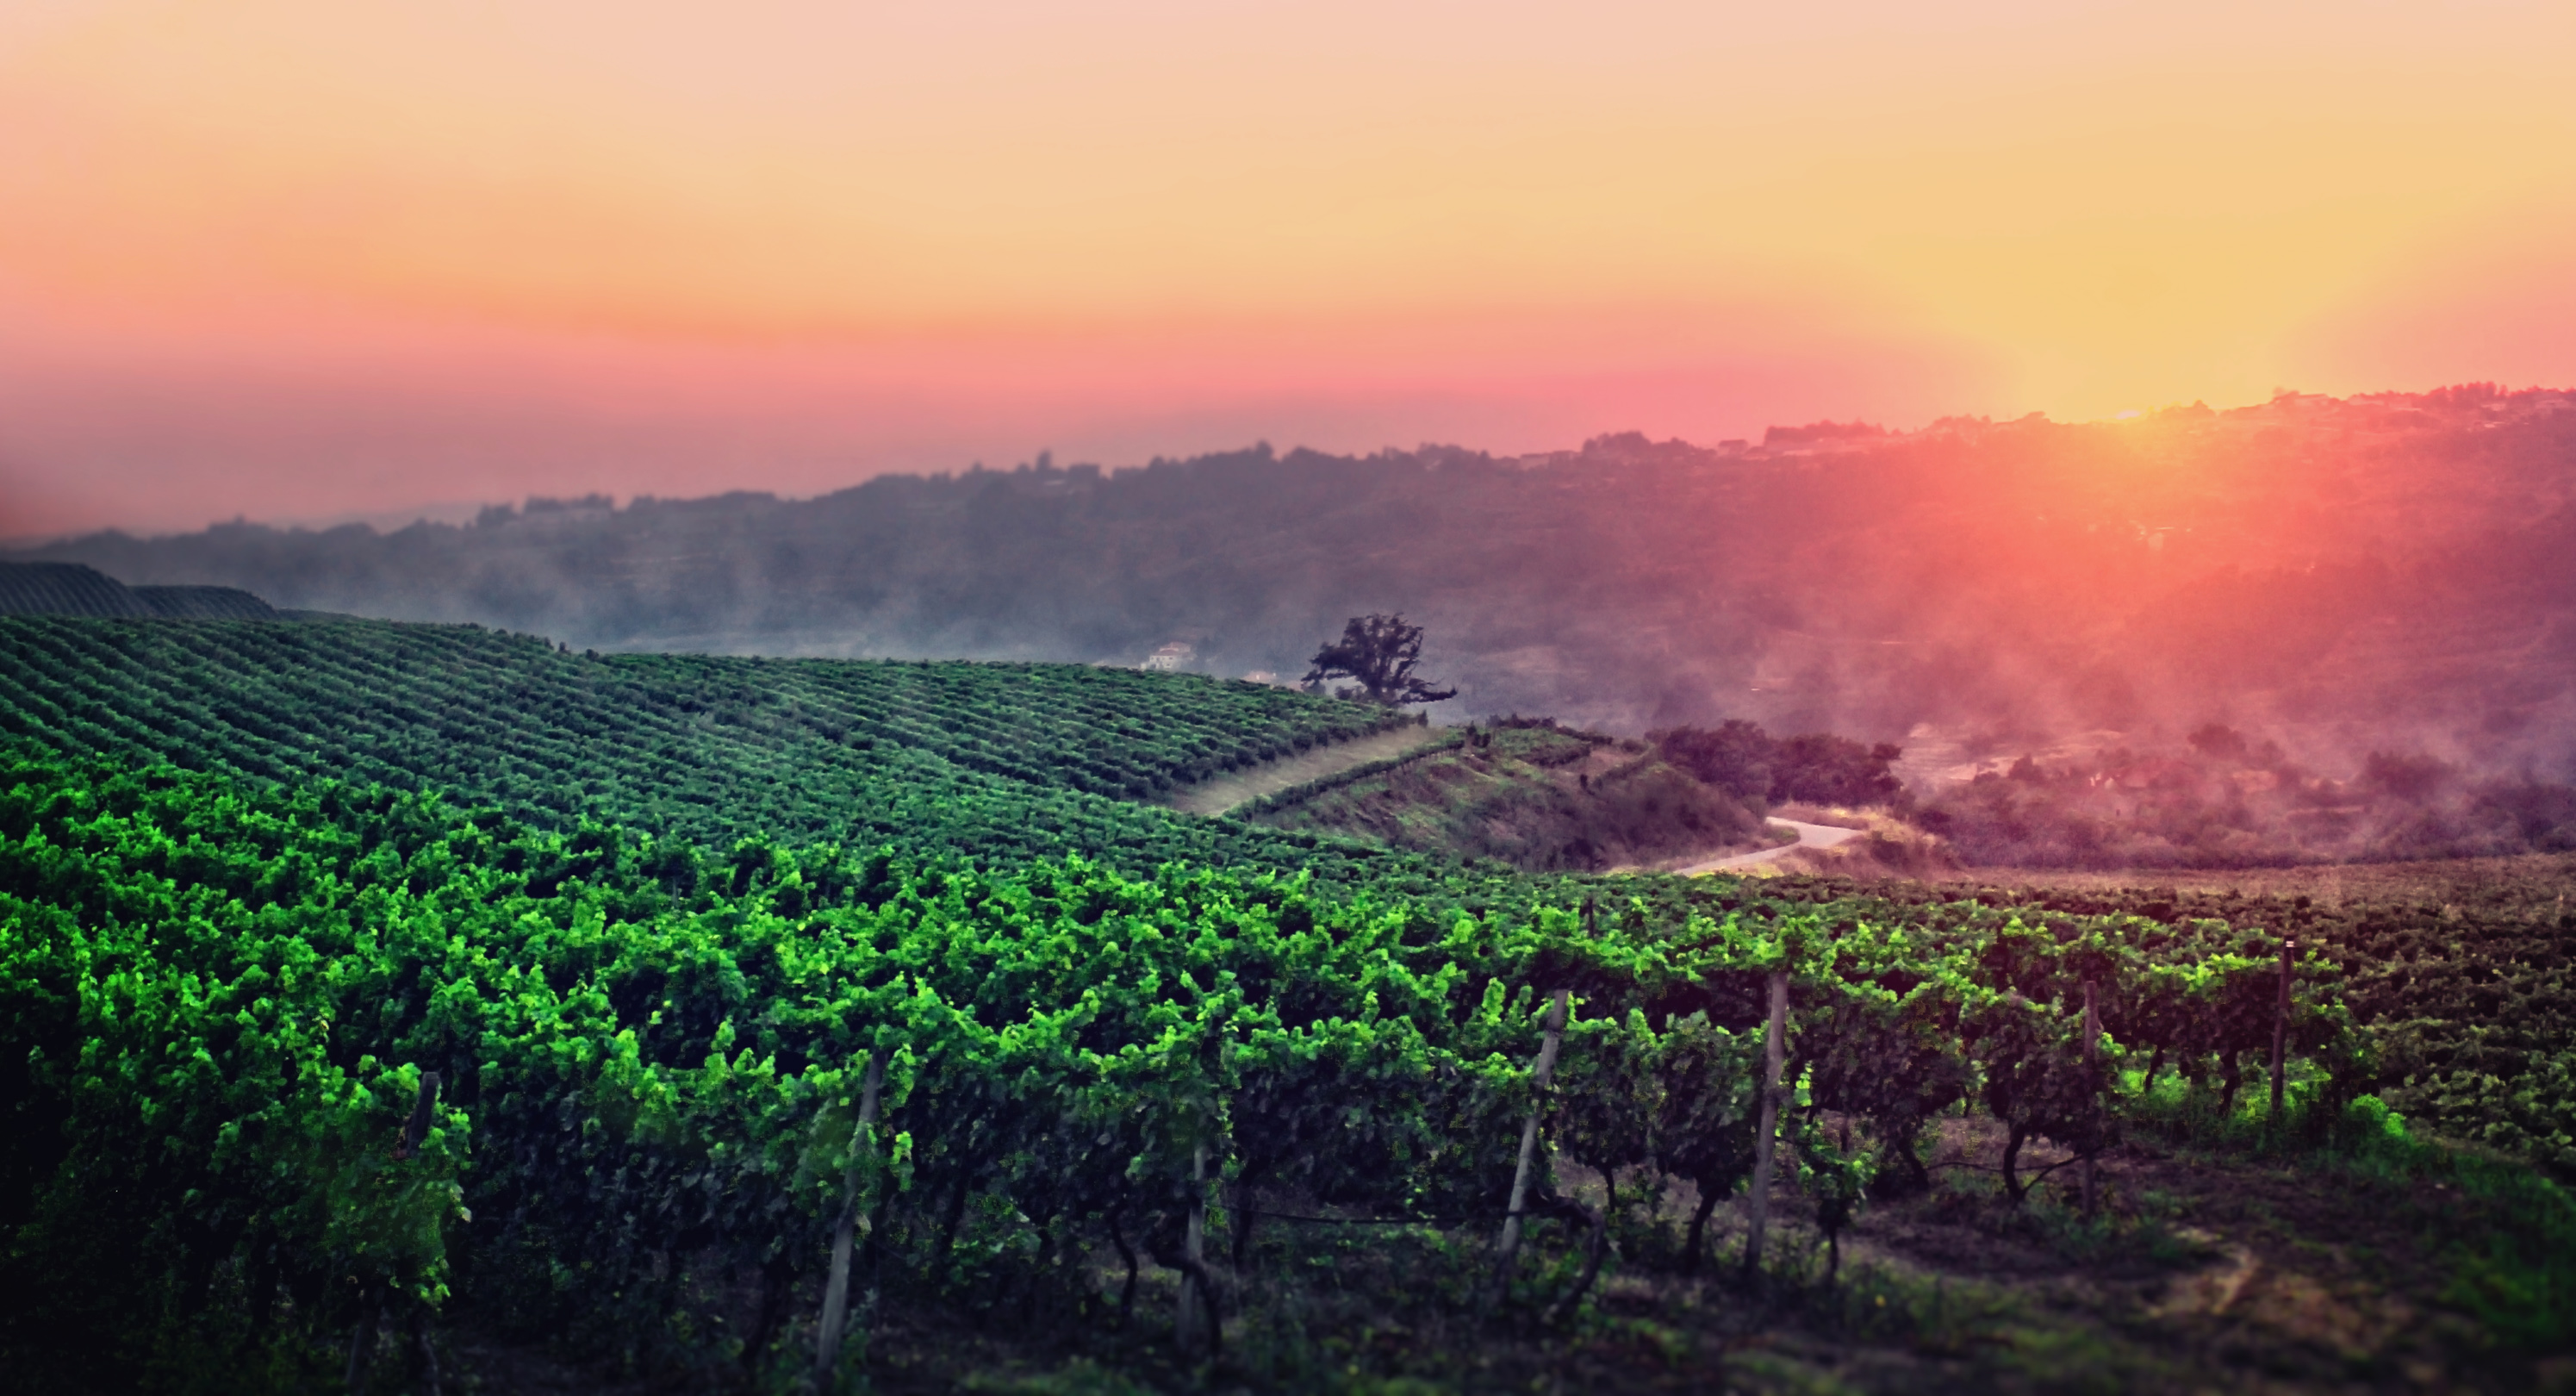 A New Dawn is Breaking - A Vineyard in Central Portugal - Penalva do Castelo